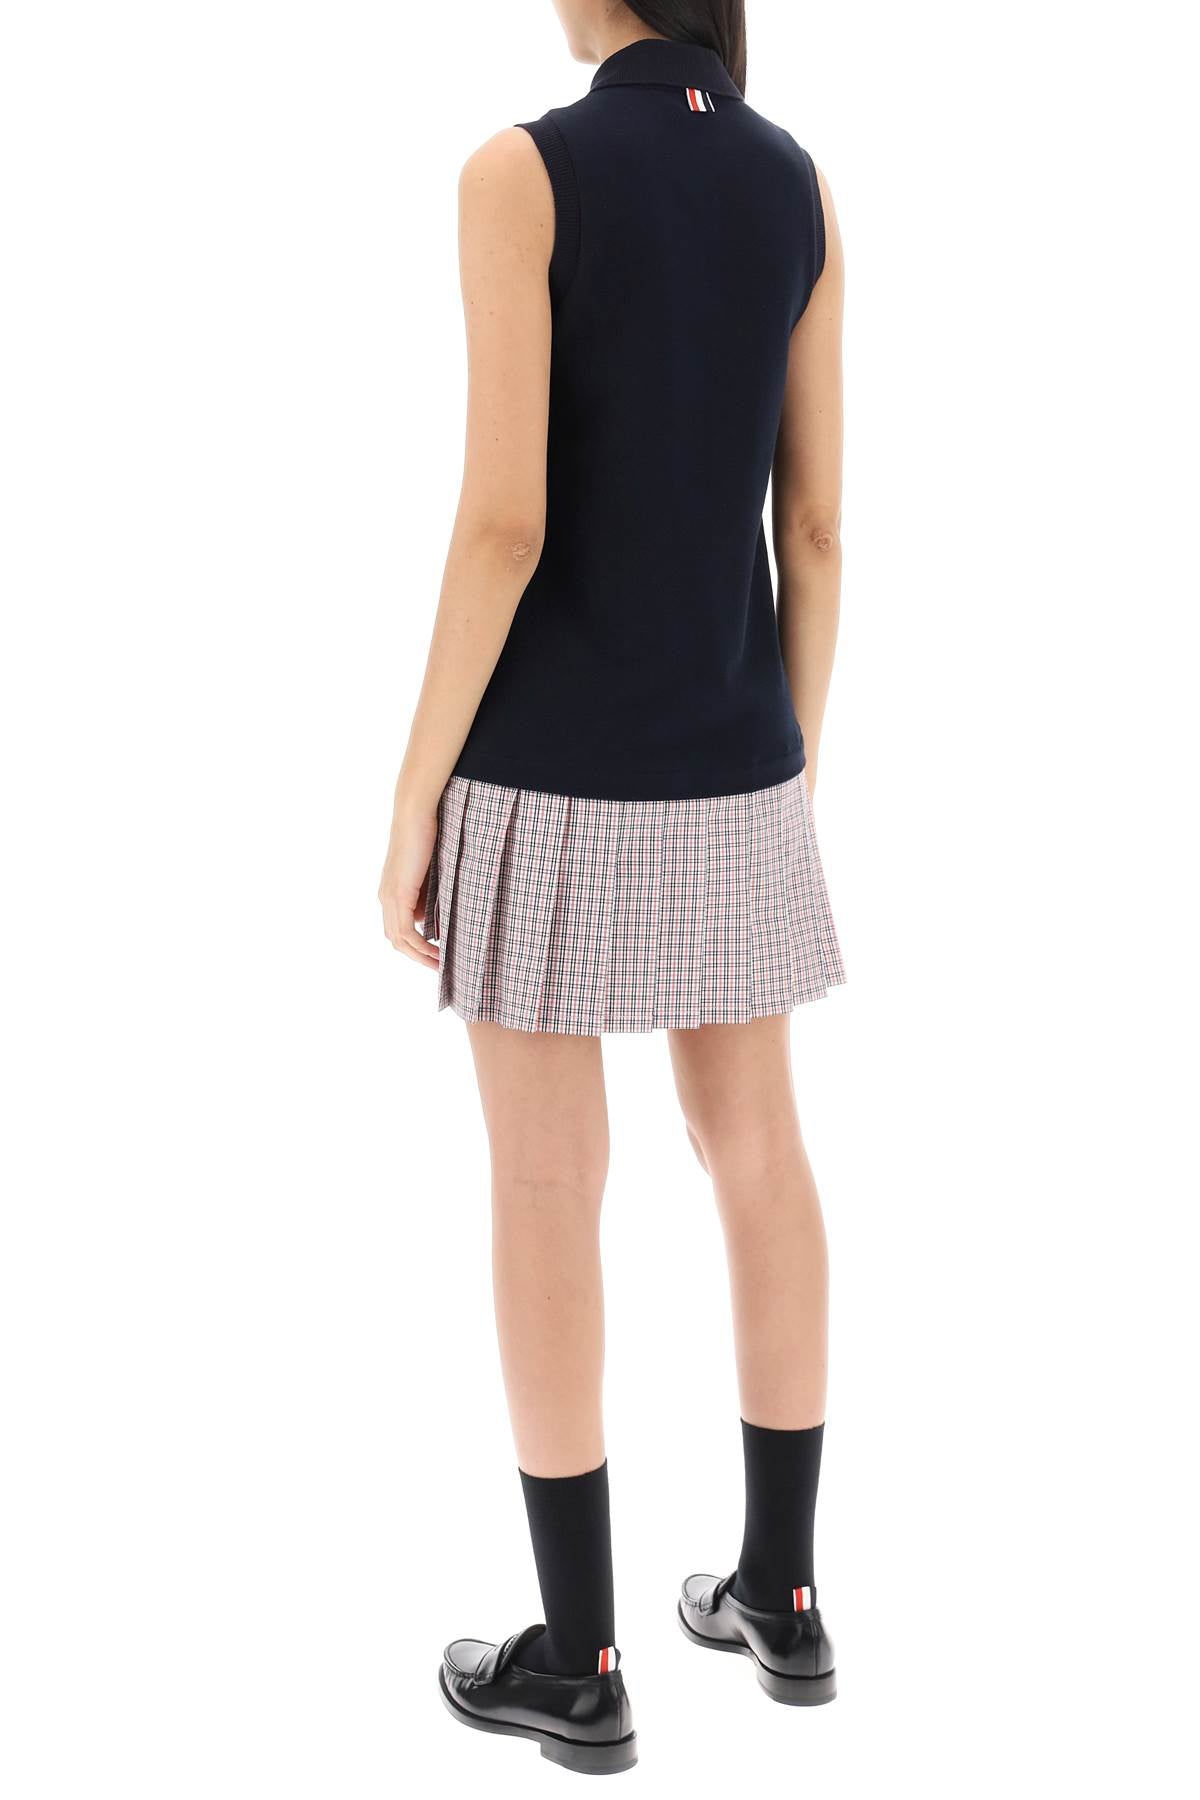 Thom browne mini polo-style dress with pleated bottom.-2